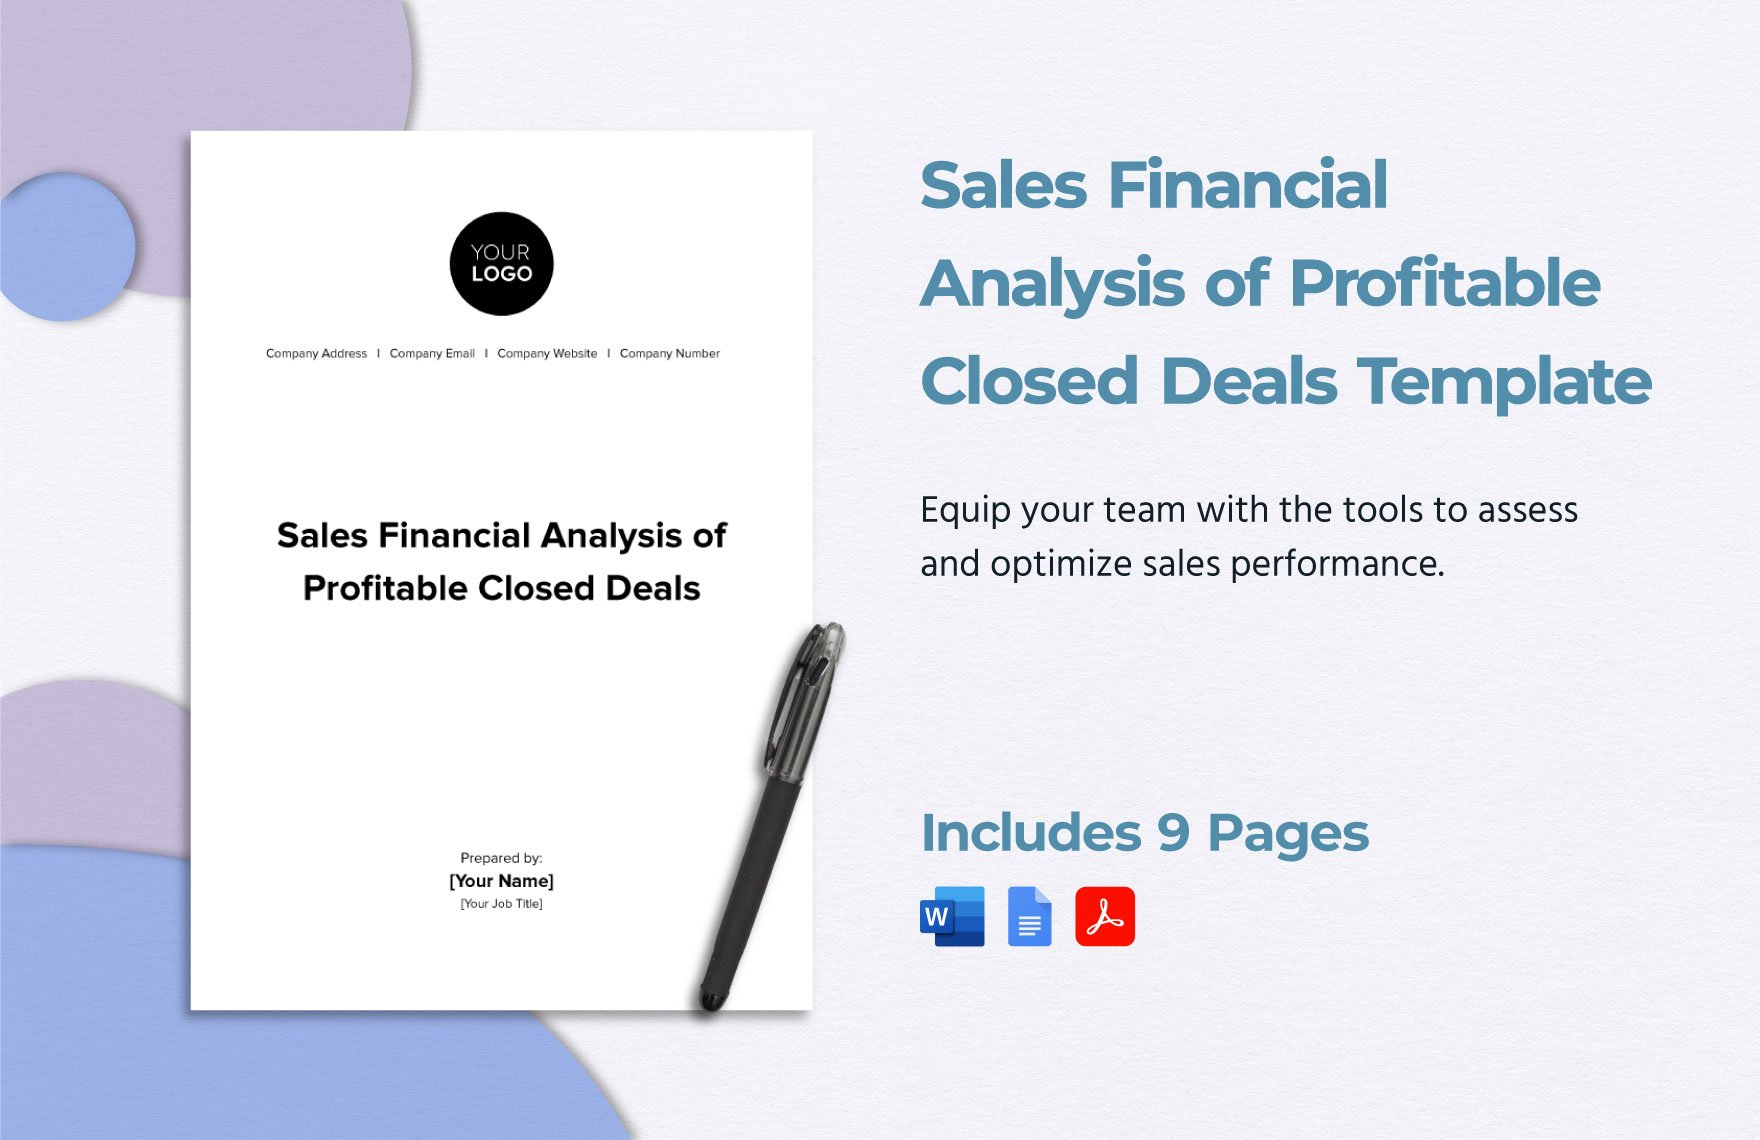 Sales Financial Analysis of Profitable Closed Deals Template in Word, Google Docs, PDF